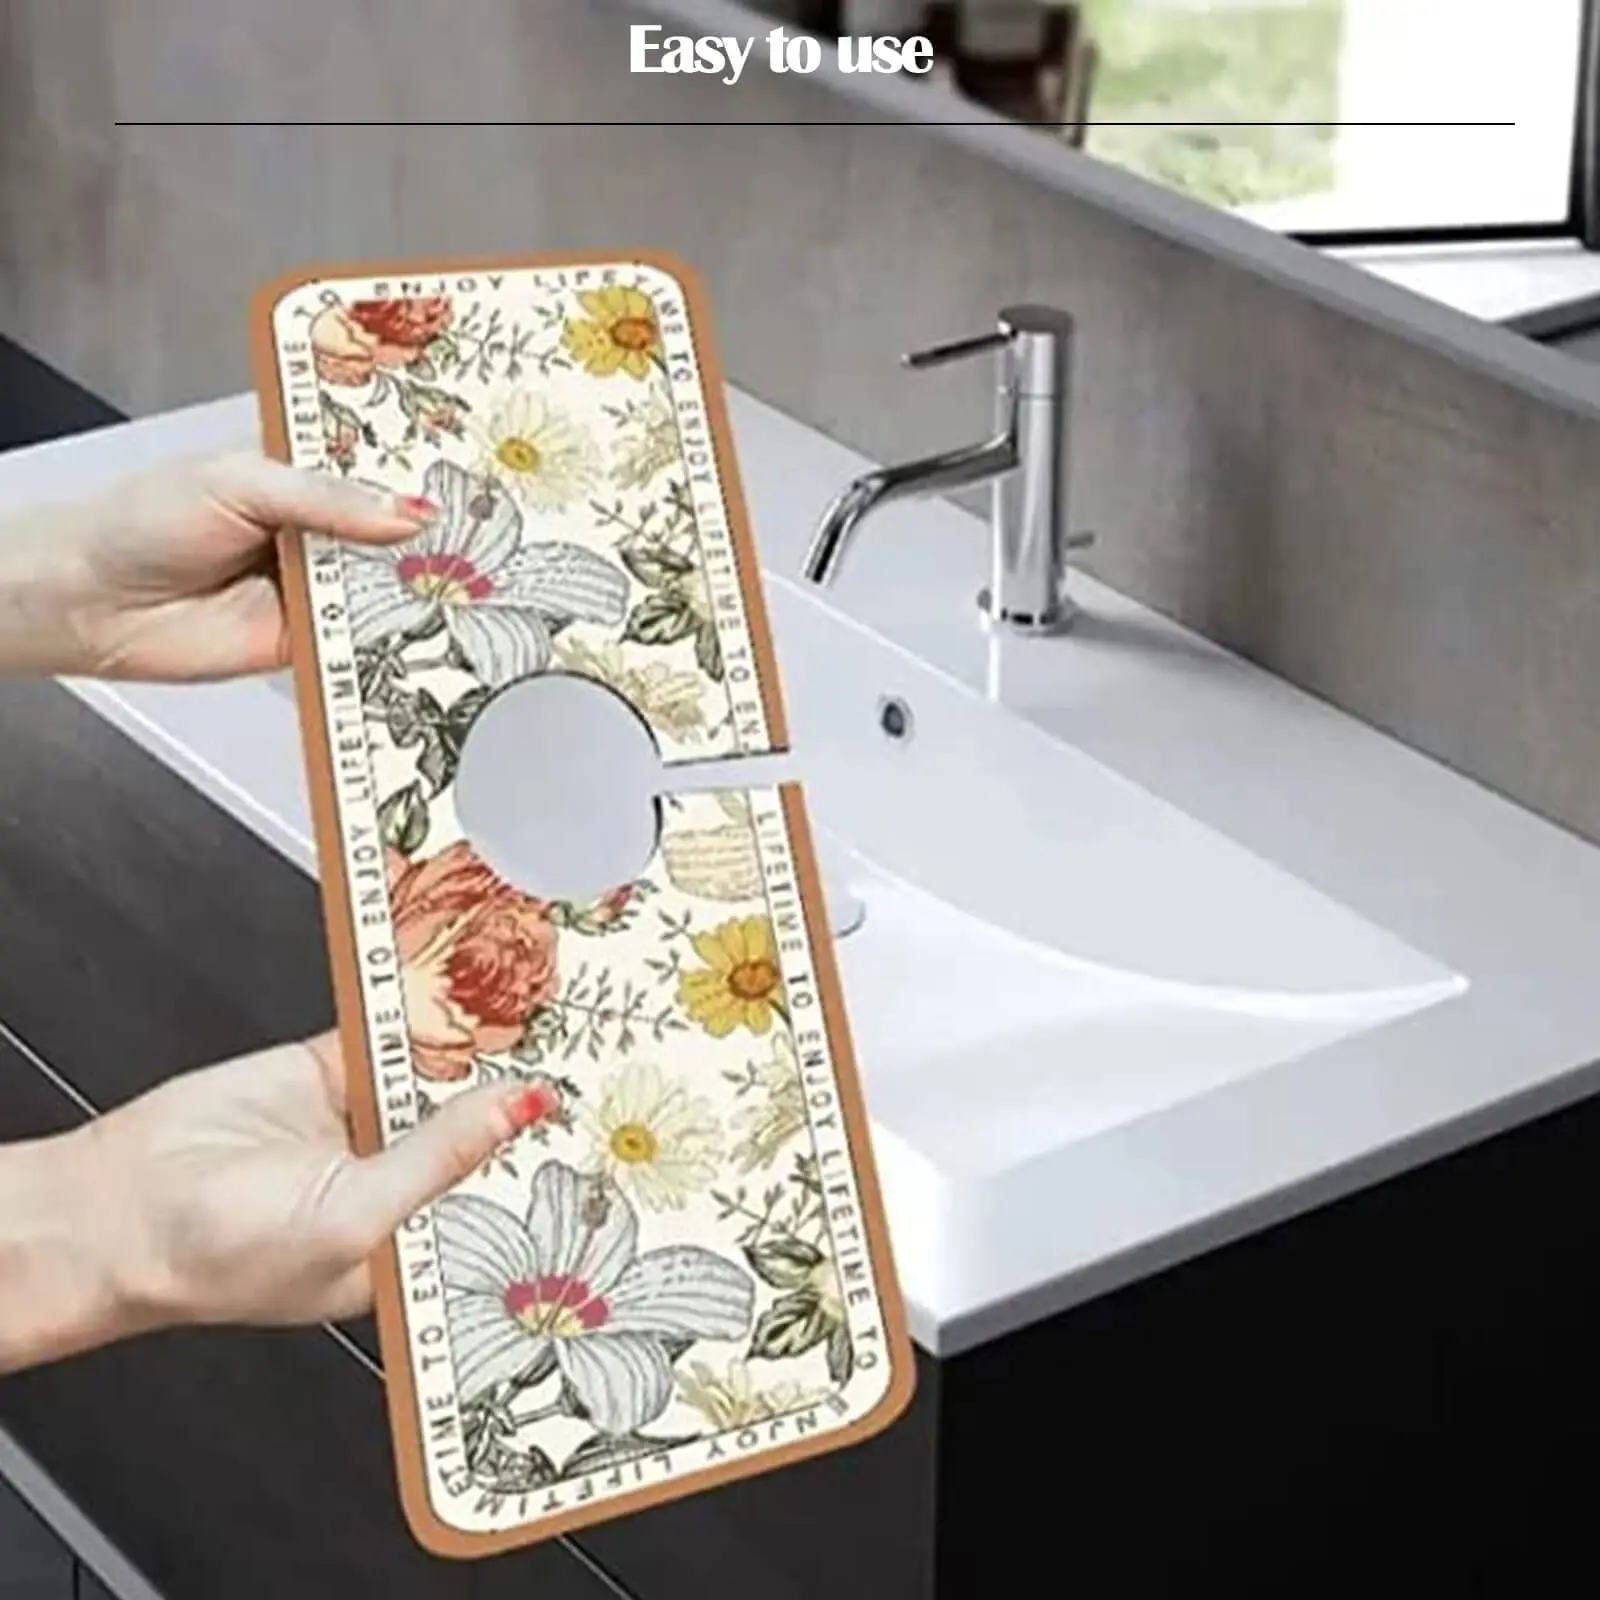 https://ae01.alicdn.com/kf/Sb7ab564762cc44338edae7d03a159195p/Fantasy-Style-Faucet-Draining-Mat-Self-Absorbent-Draining-Mat-for-Kitchen-Counter-Vintage-Floral-Plates-Dish.jpg